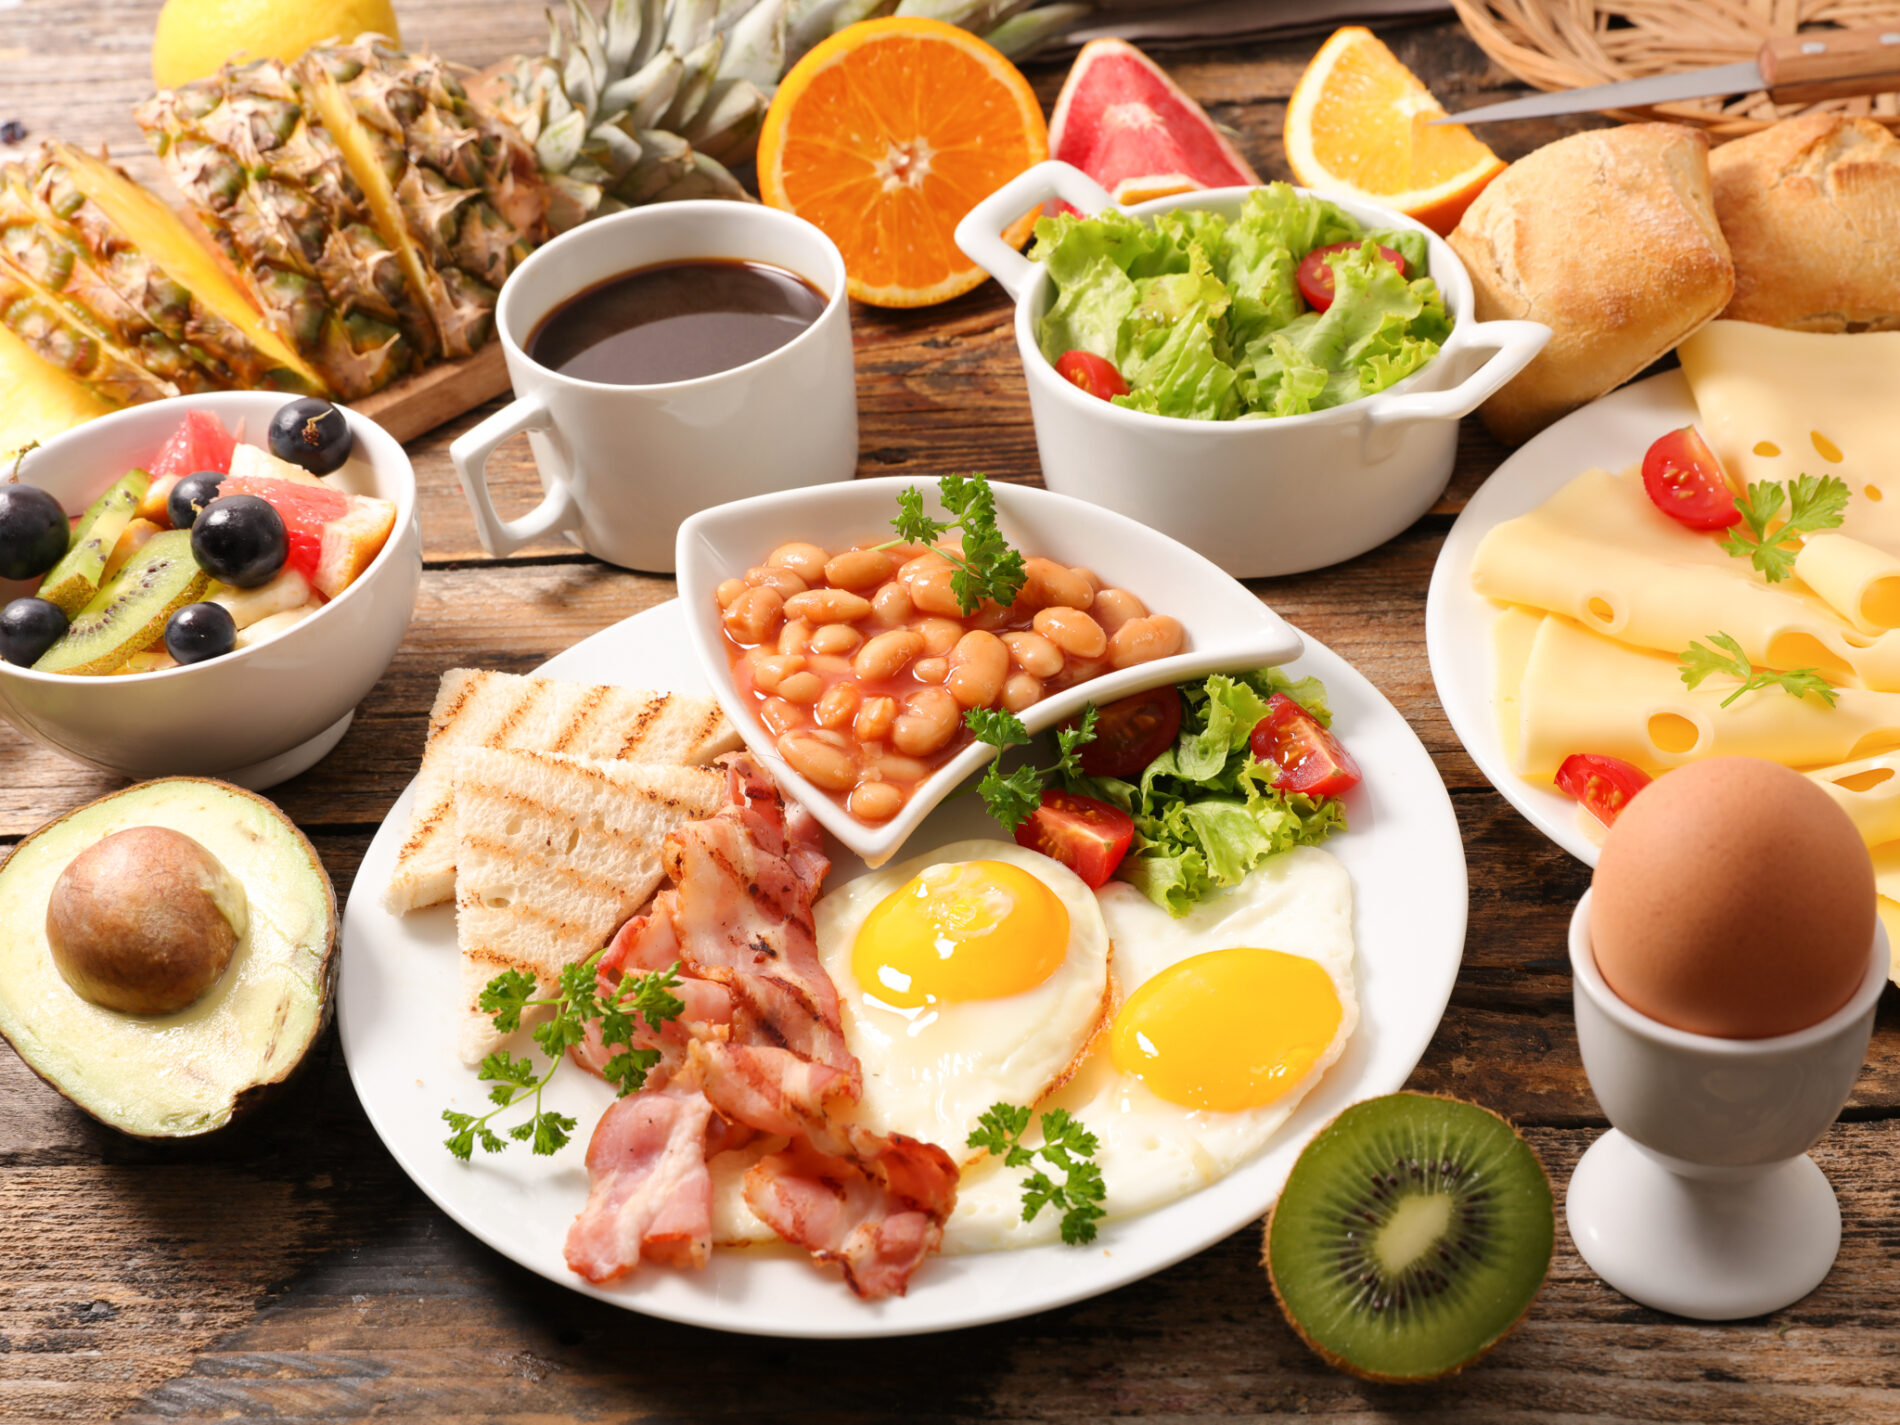 Brunch with eggs, bacon, beans, cheese, fruits and coffee